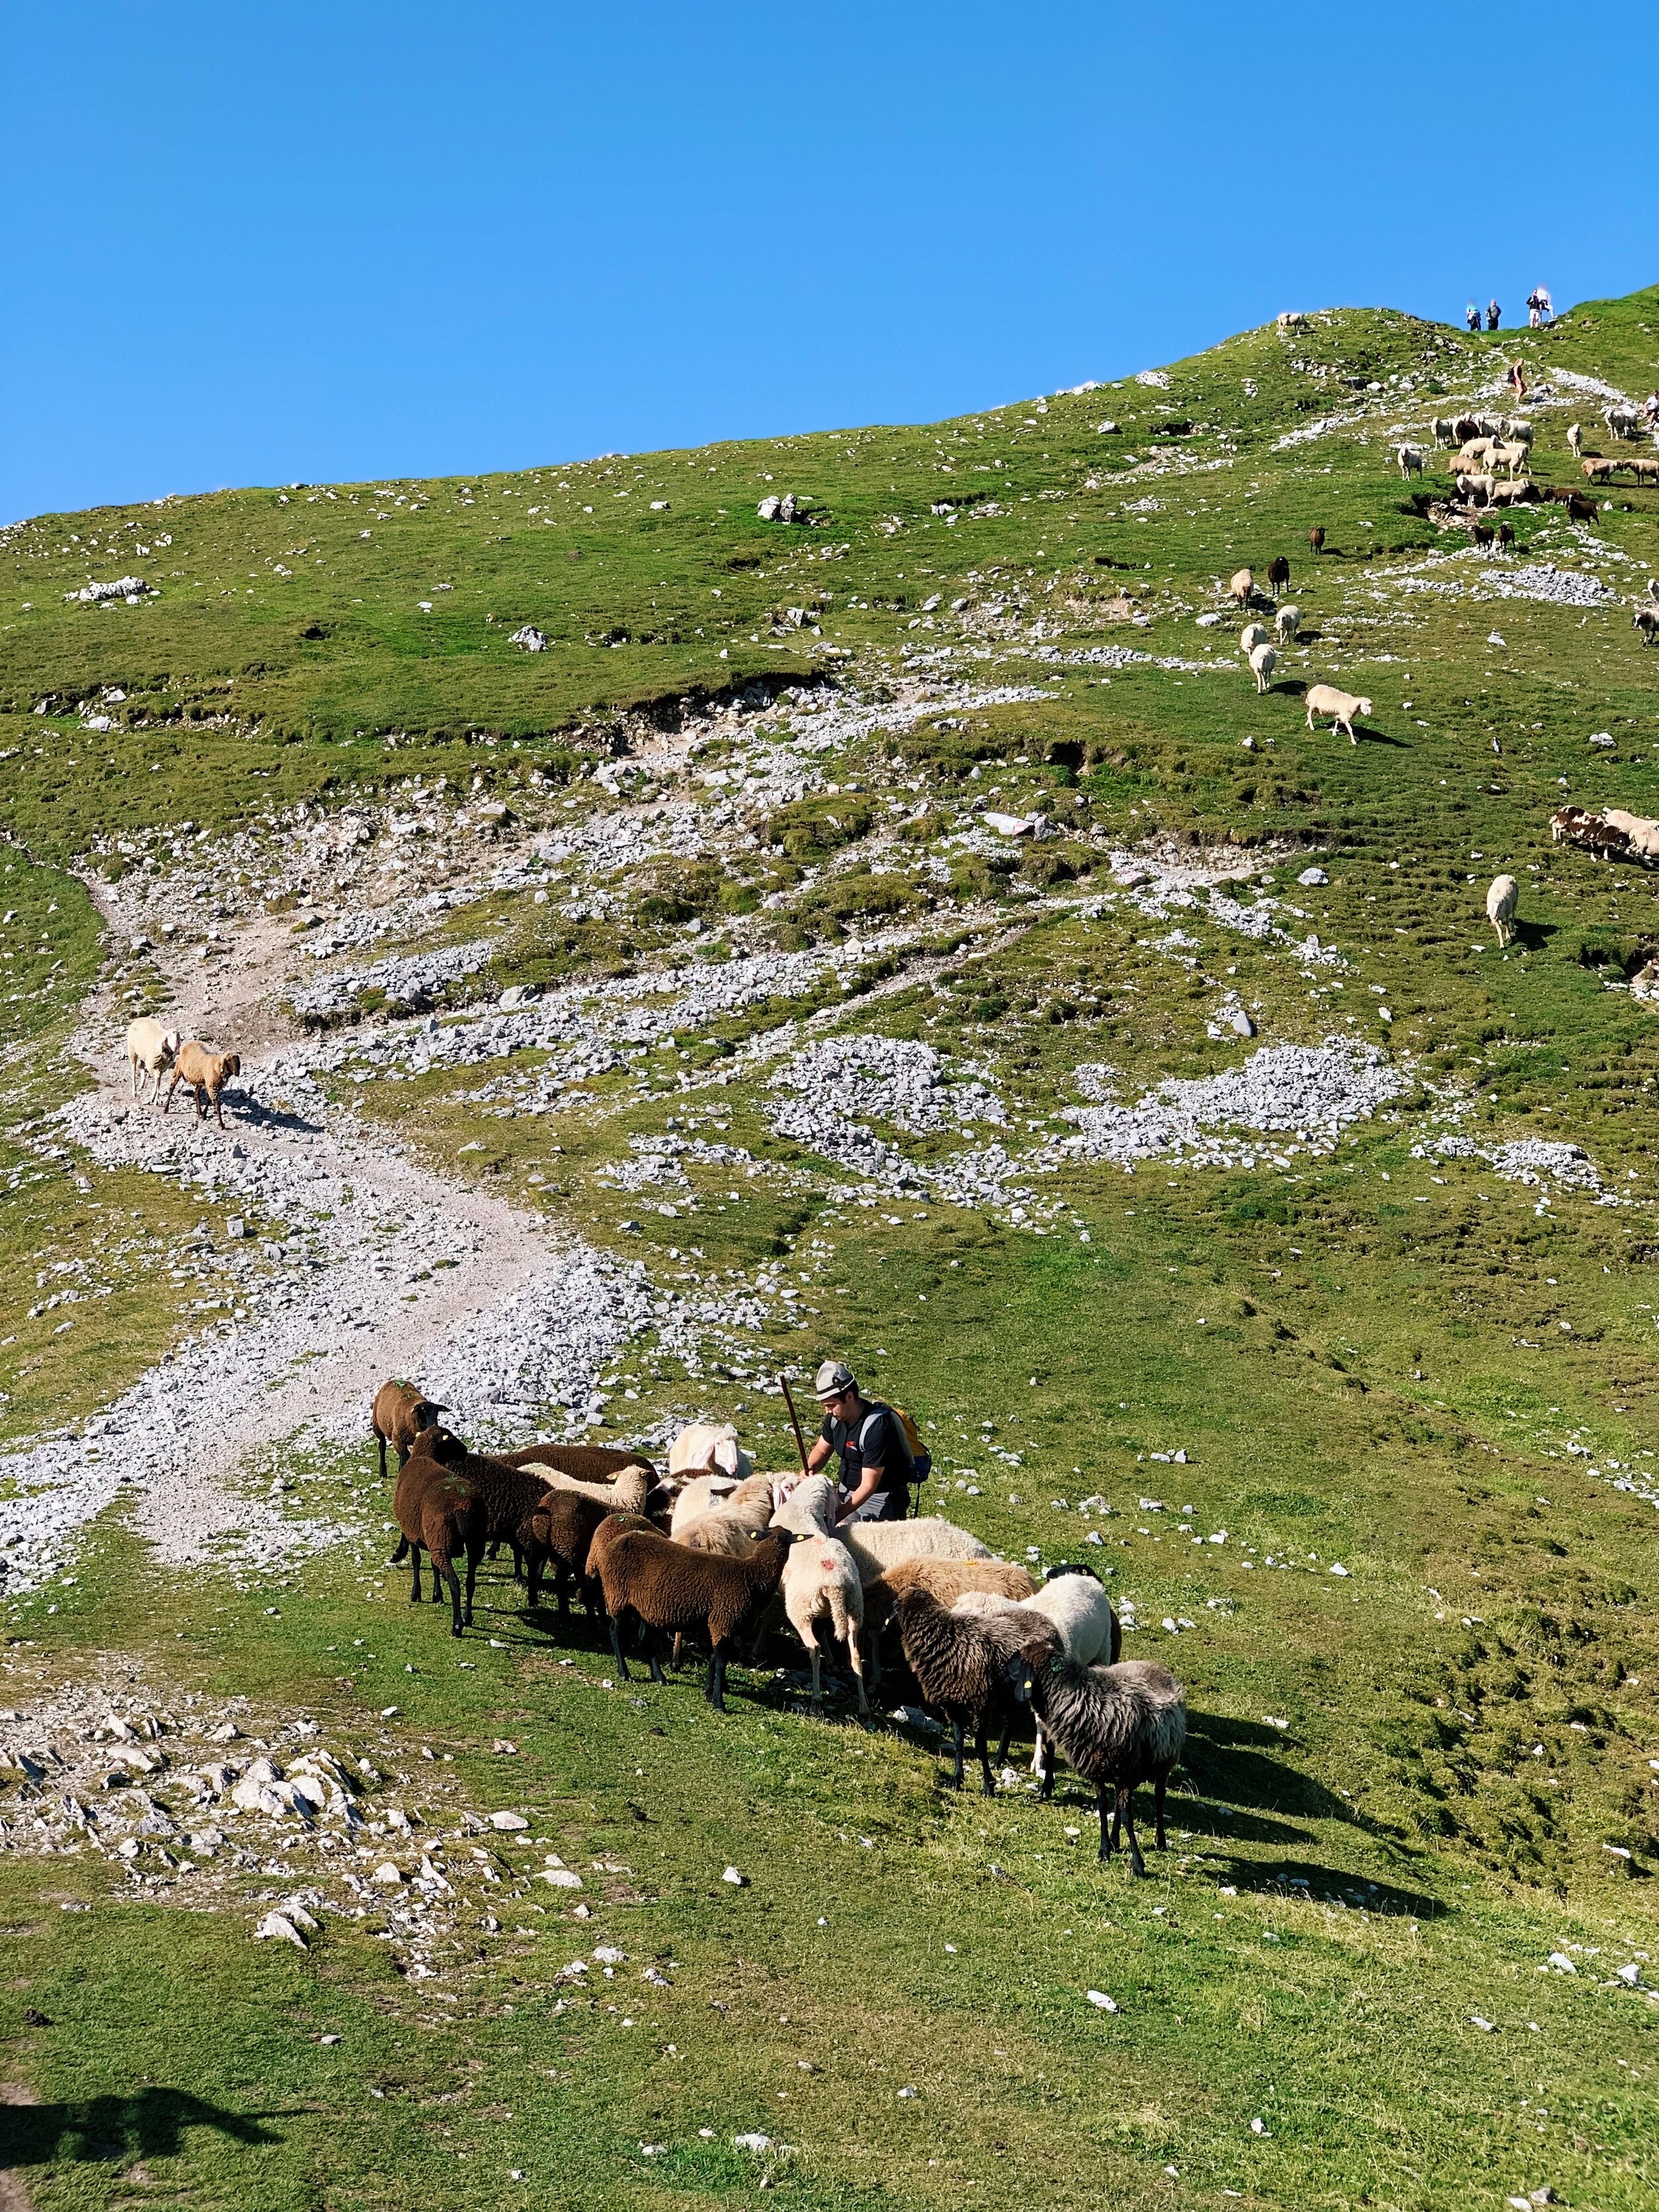  My favorite part of the hike was rounding the corner and seeing this shepherd round up his flock. 